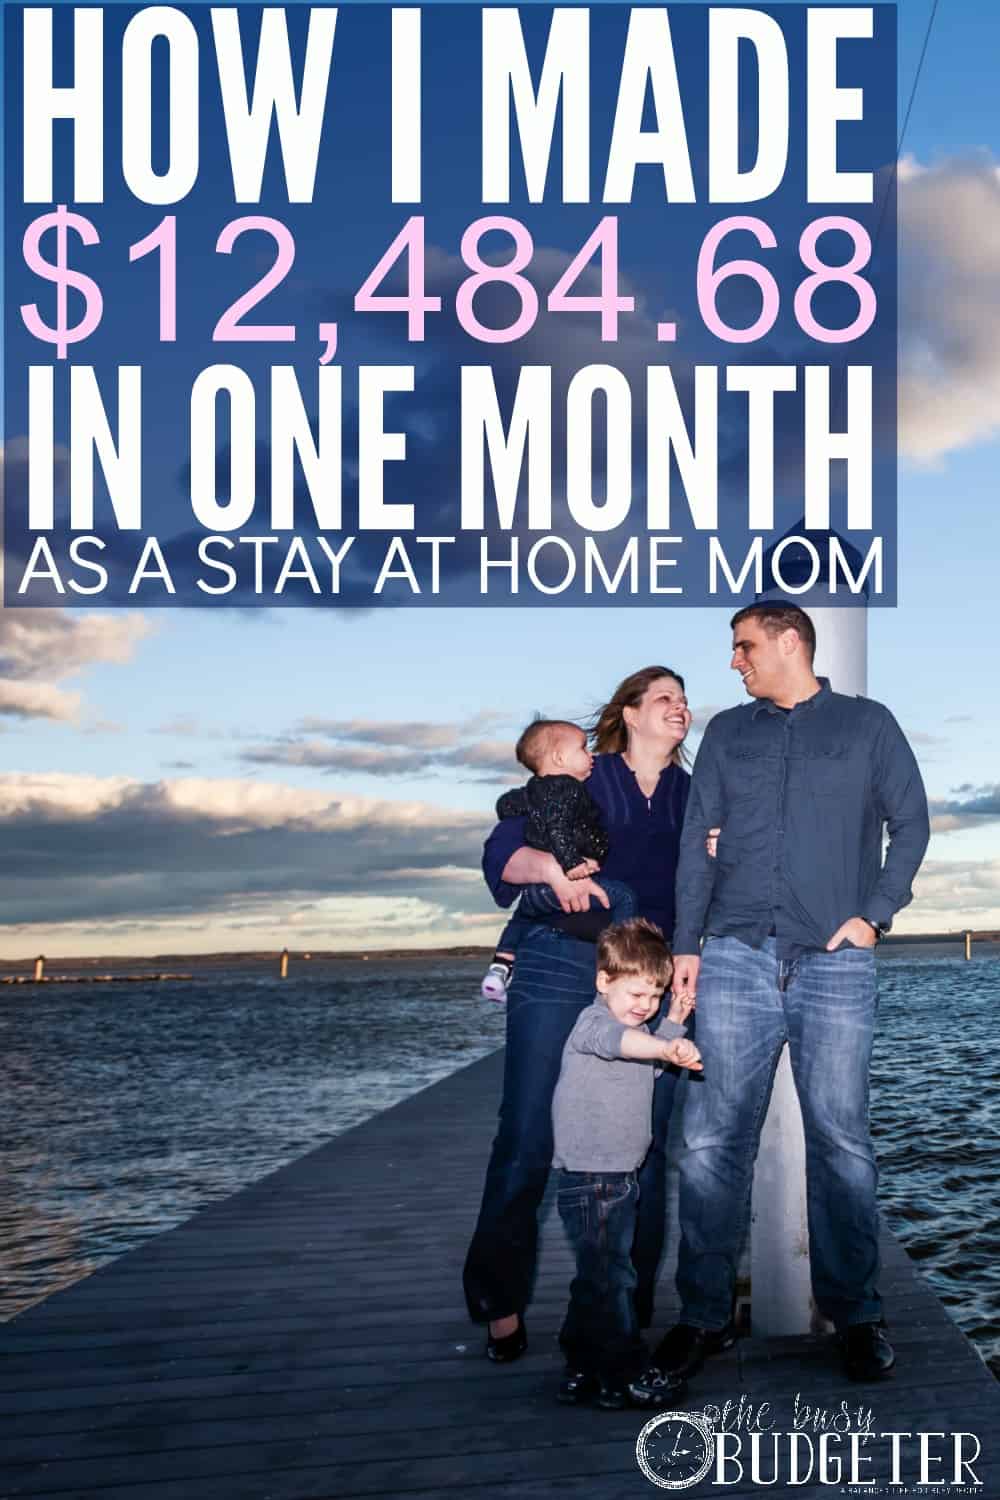 How I Made $12,484.68 in One Month as a Stay at Home Mom. I'm so impressed right now. I have a close friend that does this as well (about $6,000/month but still impressive). I know it's likely a lot of hard work, but totally worth it if I actually got to see my babies all day. I've looked at other ways to make money as a stay at home mom and I just see surveys and apps that save you money instead of making you money. Which, you can;t exactly pay for groceries on survey earnings. 